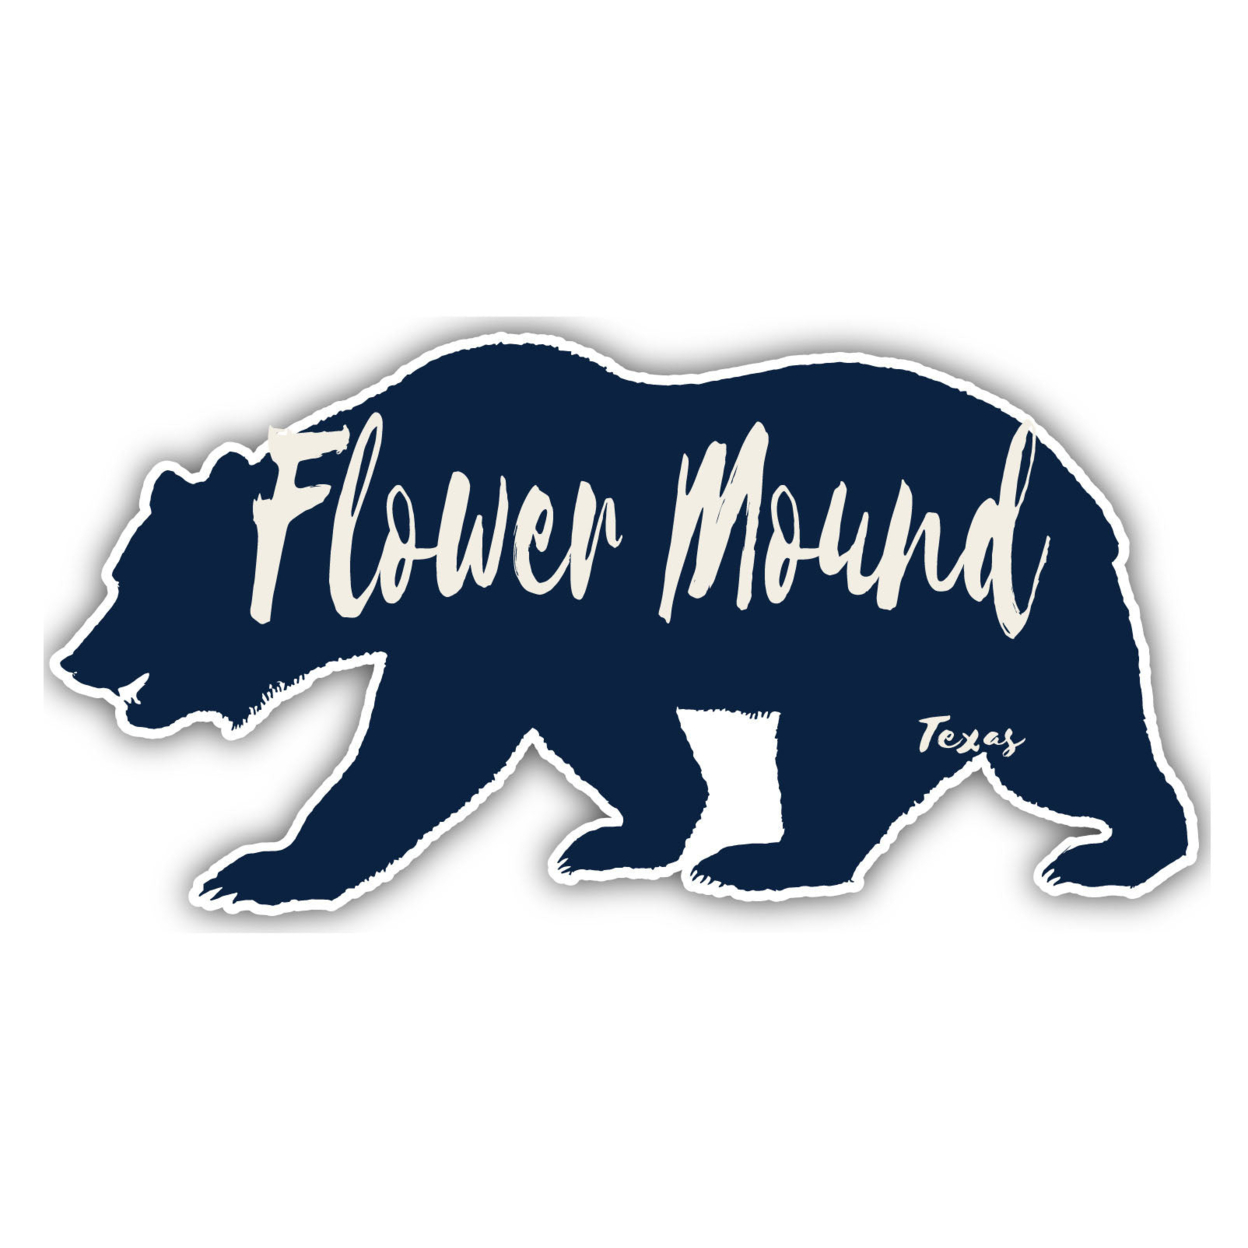 Flower Mound Texas Souvenir Decorative Stickers (Choose Theme And Size) - 4-Pack, 12-Inch, Camp Life